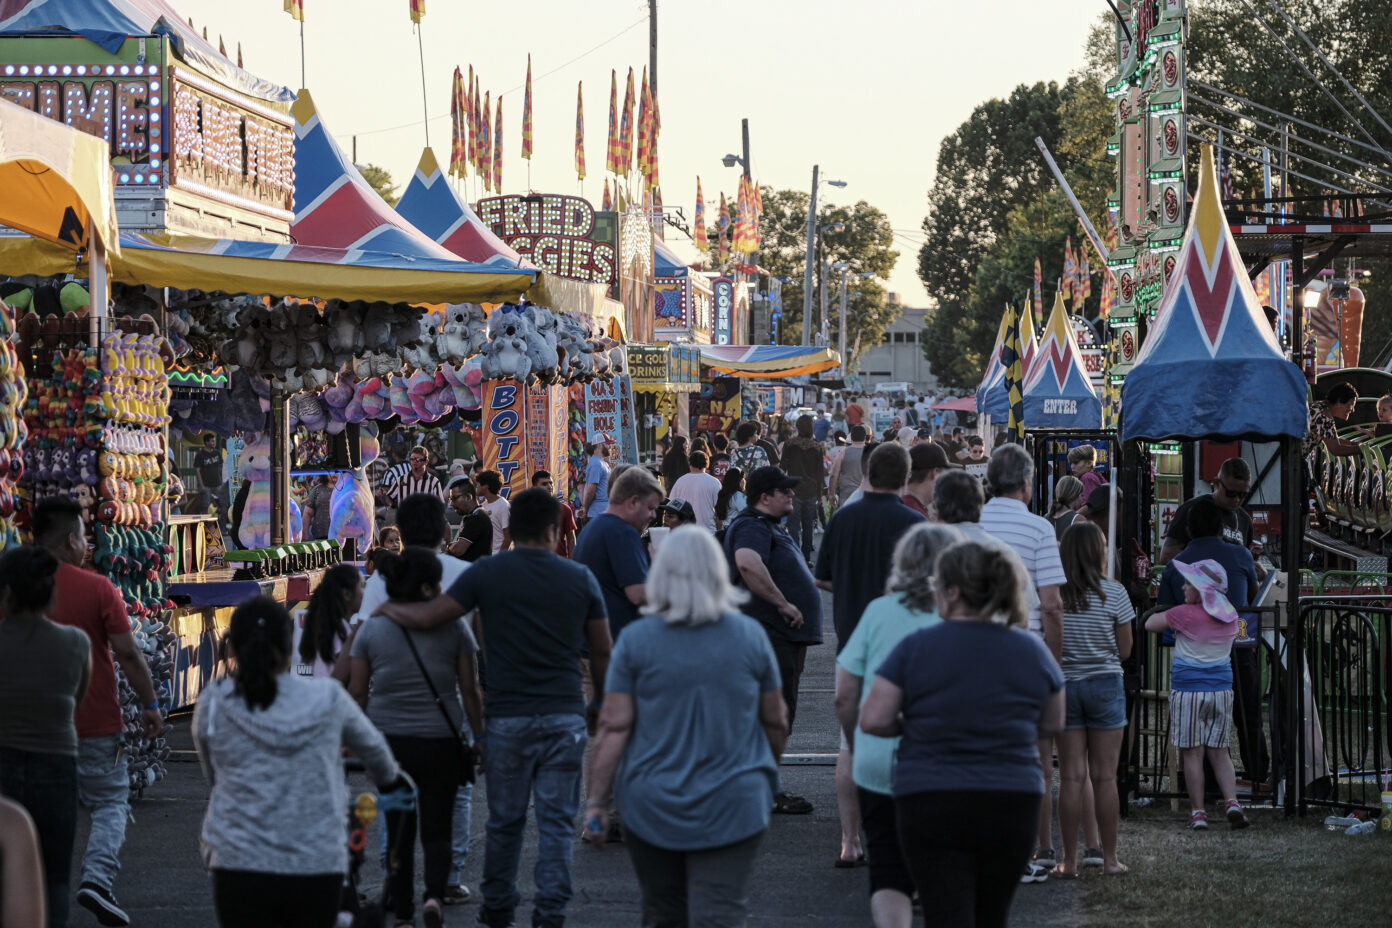 County fair attendance dips a bit, but organizers say the week was